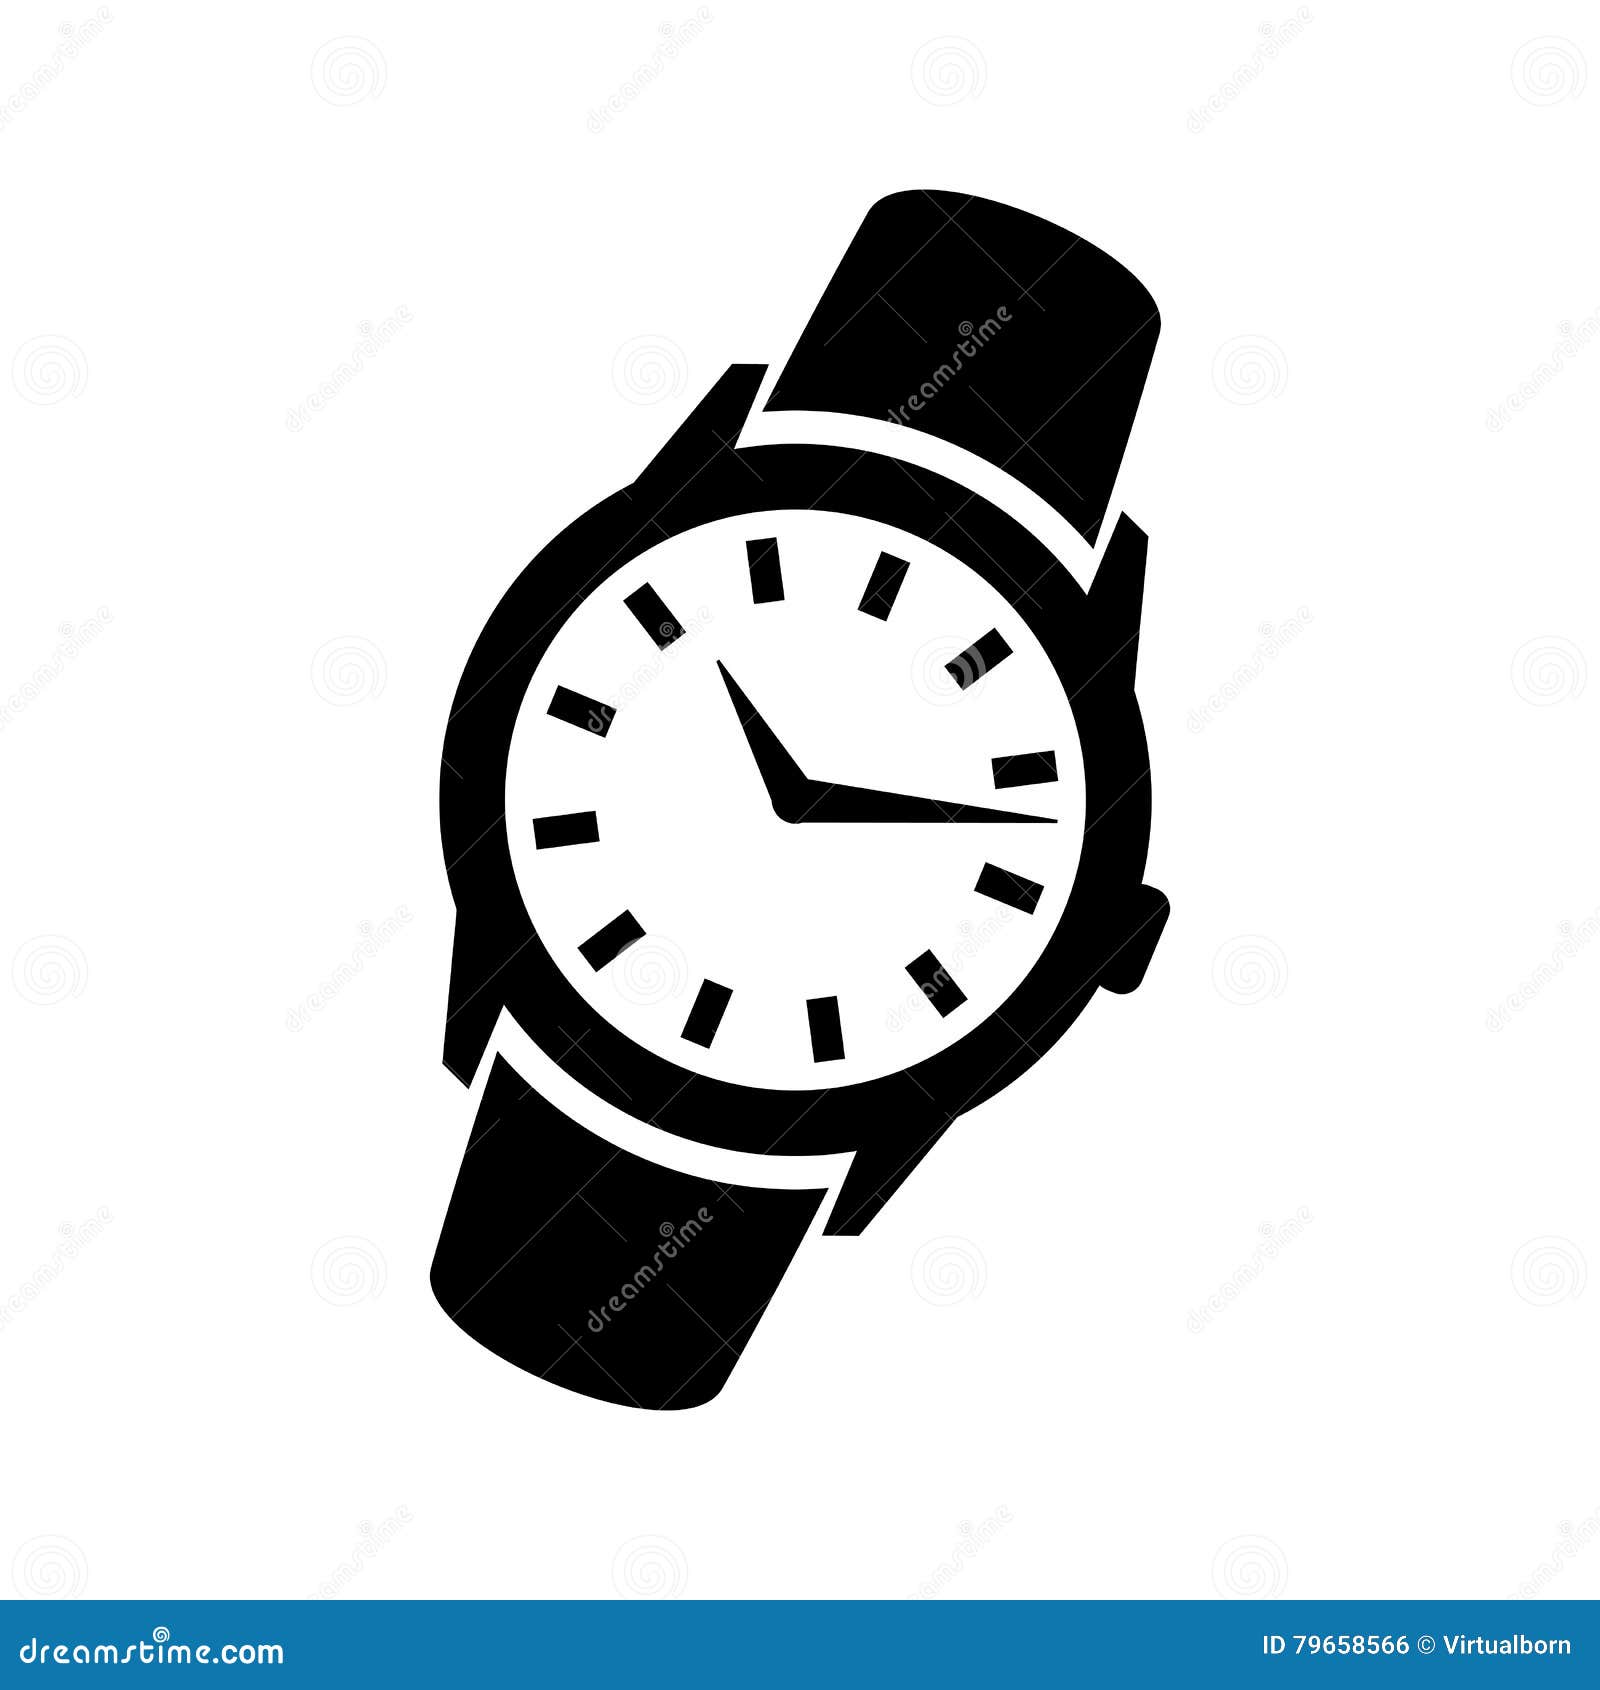 wrist watch clipart black and white - photo #18